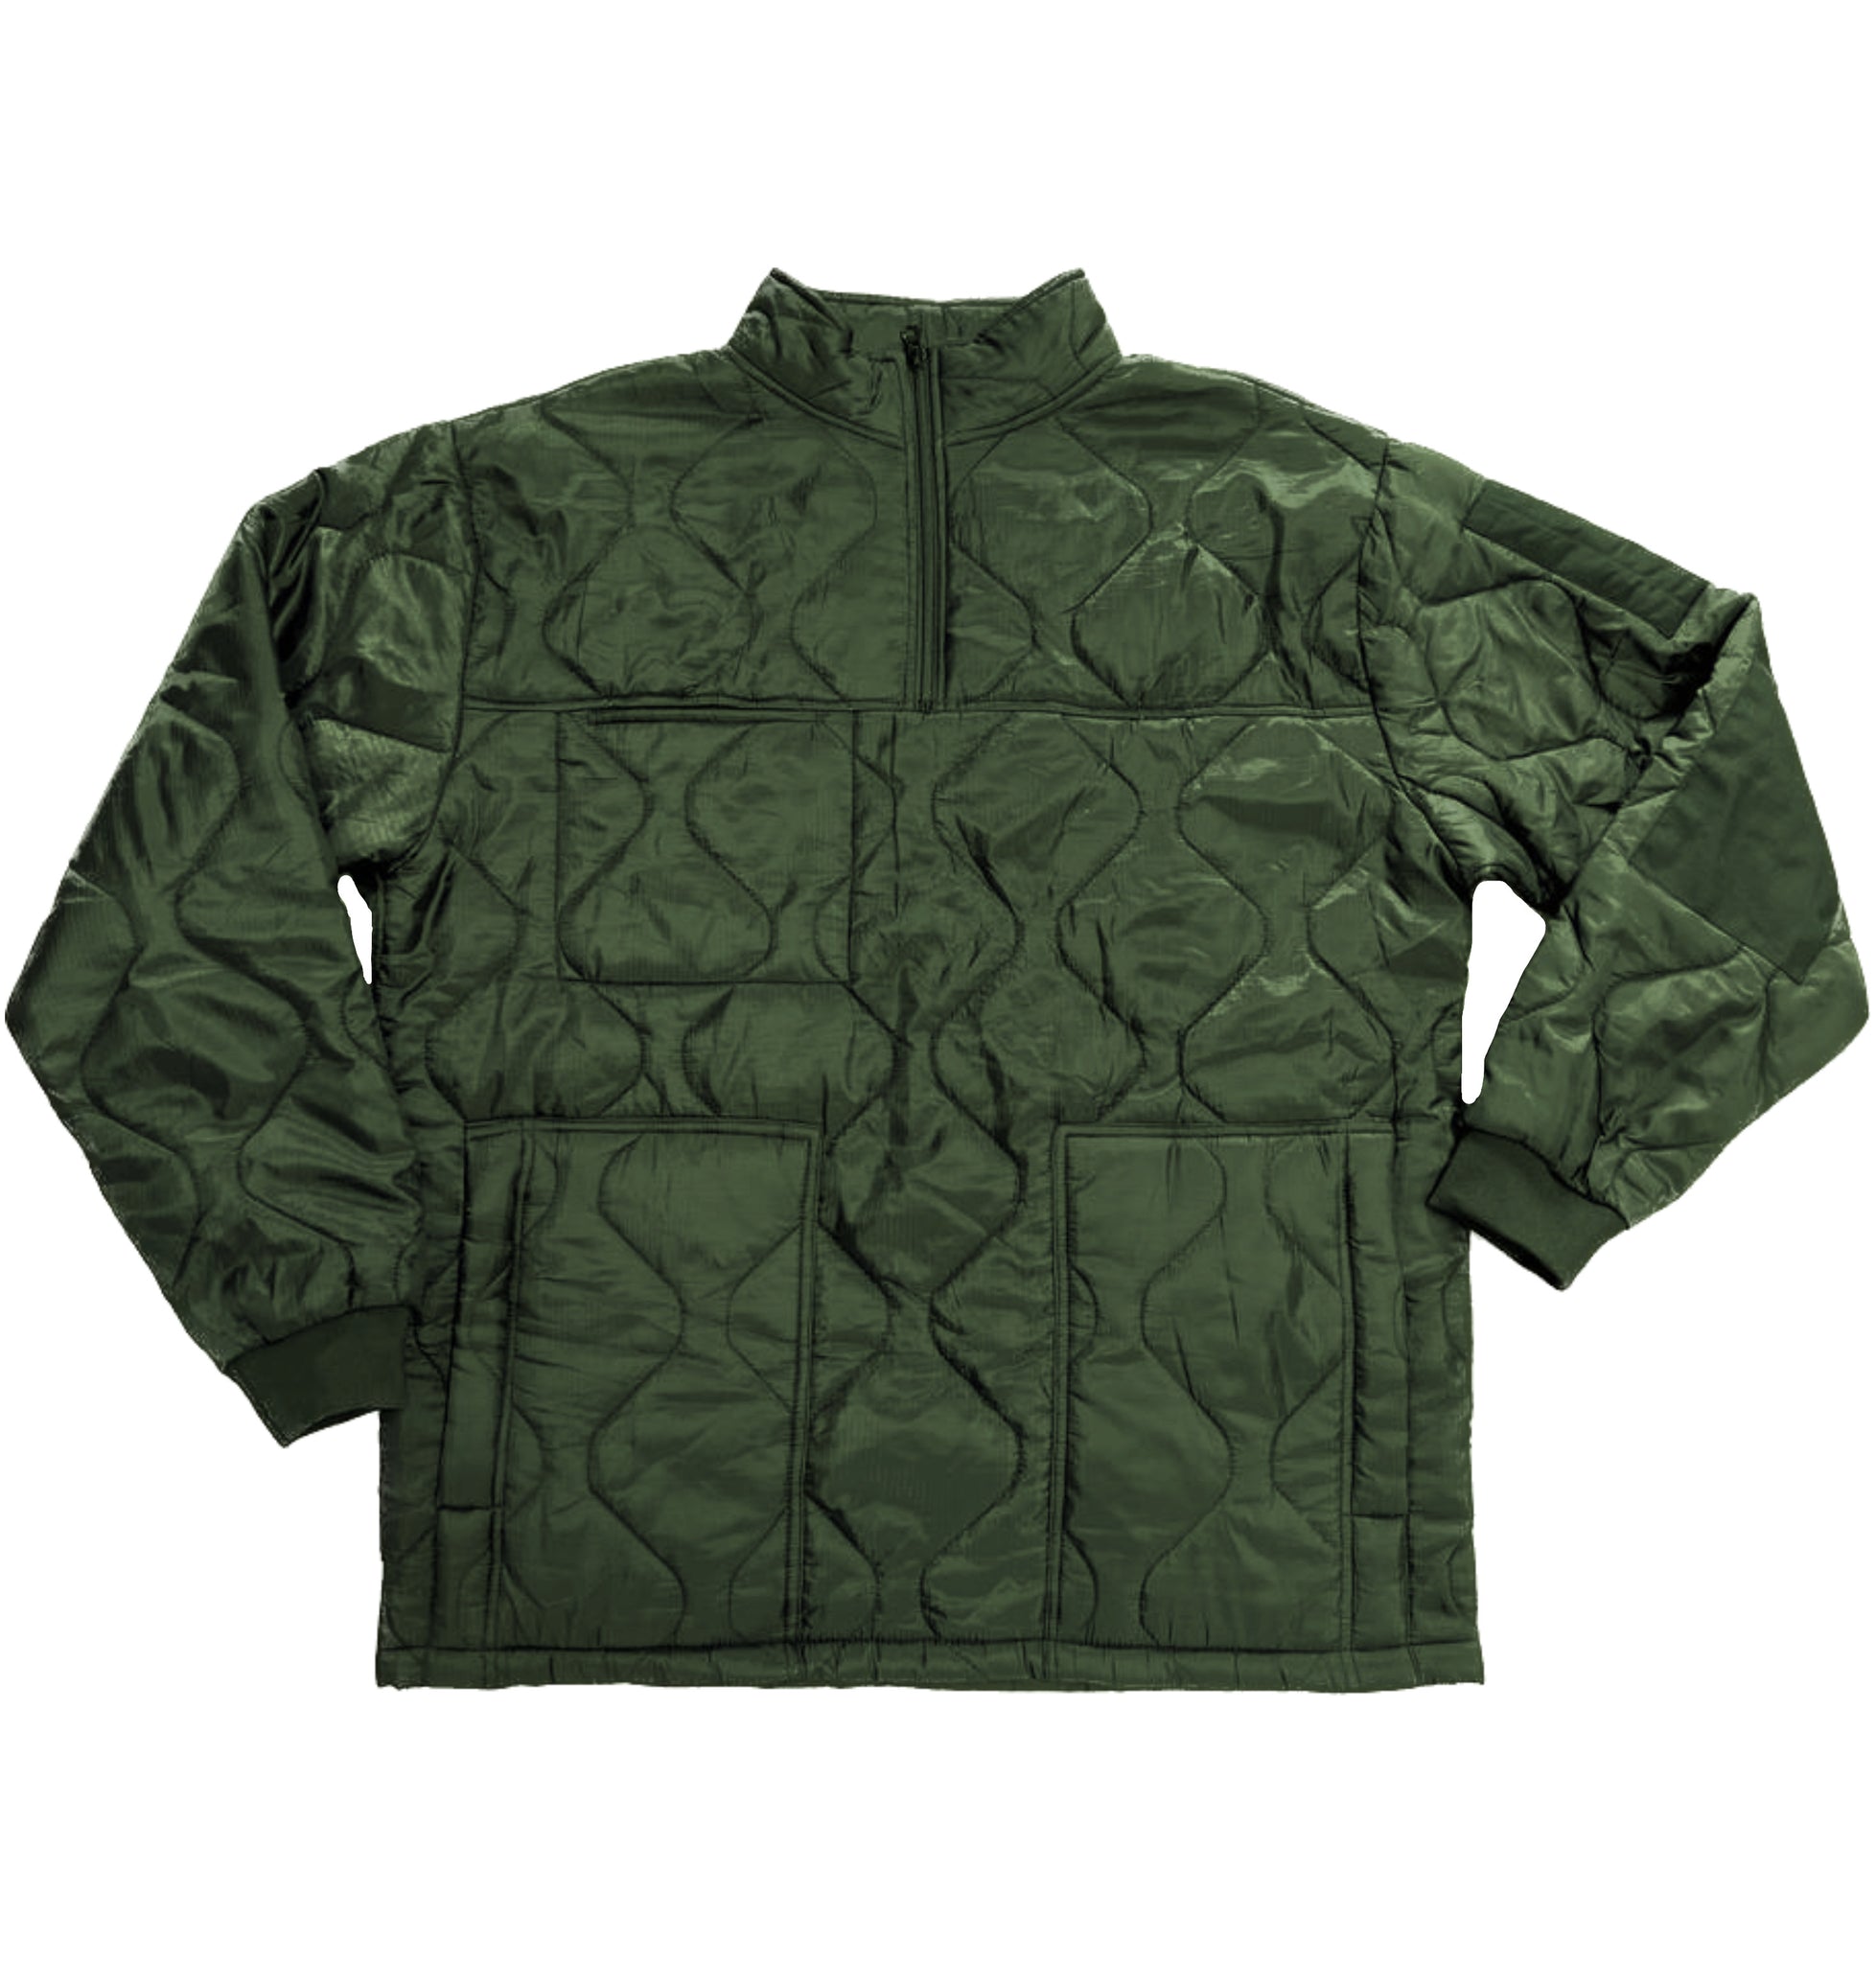 Mission Essential Gear The Field JacketZippe